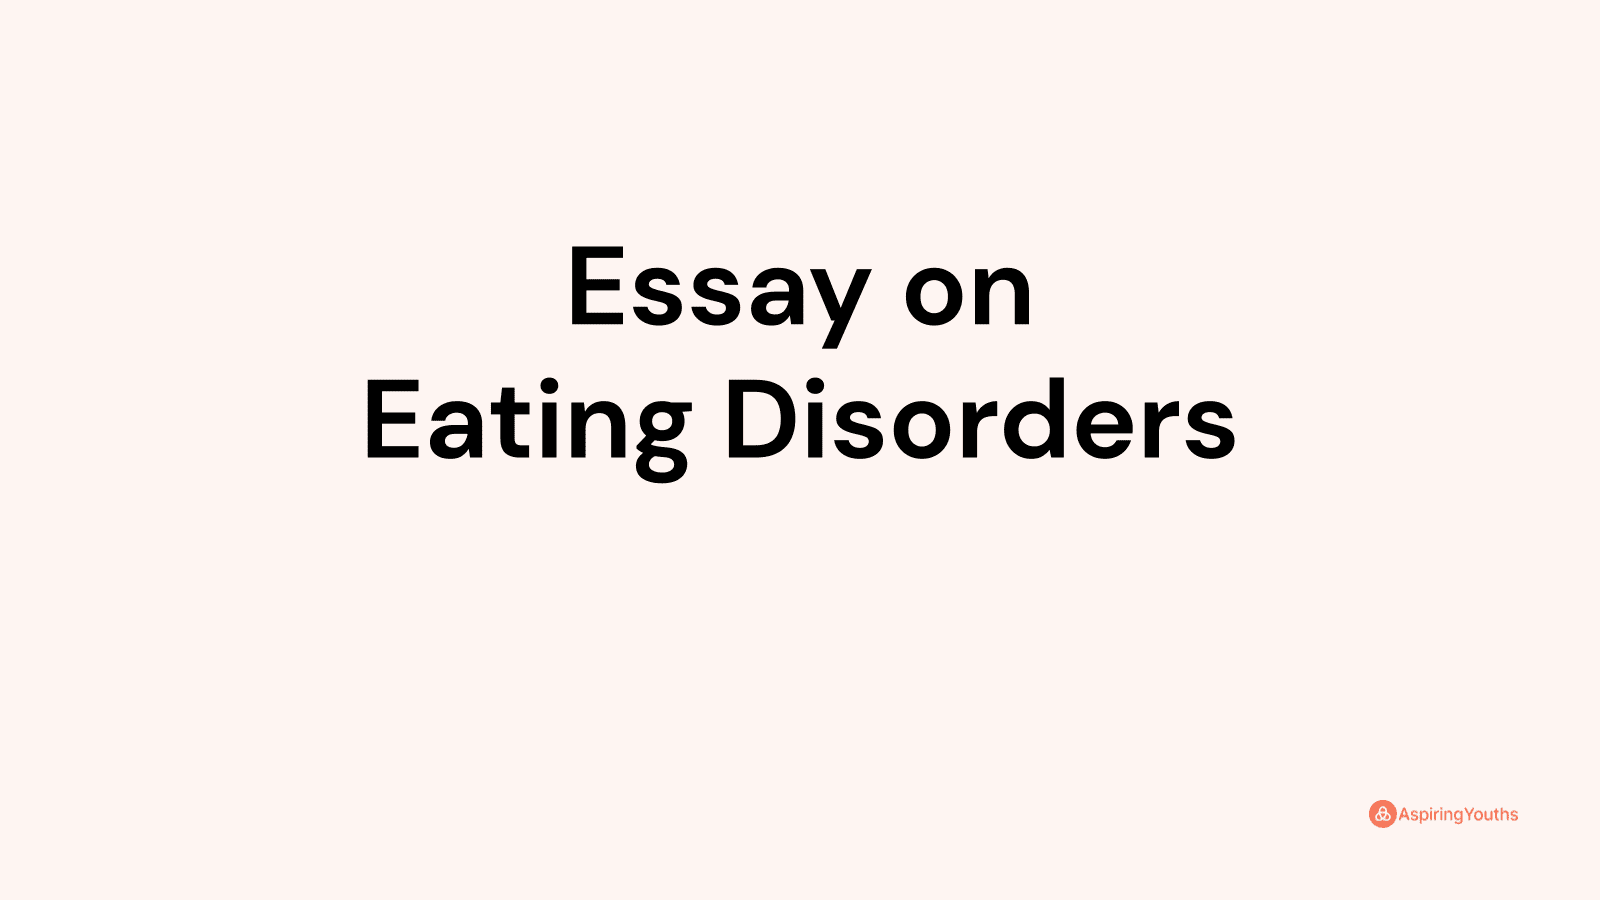 title for an eating disorder essay